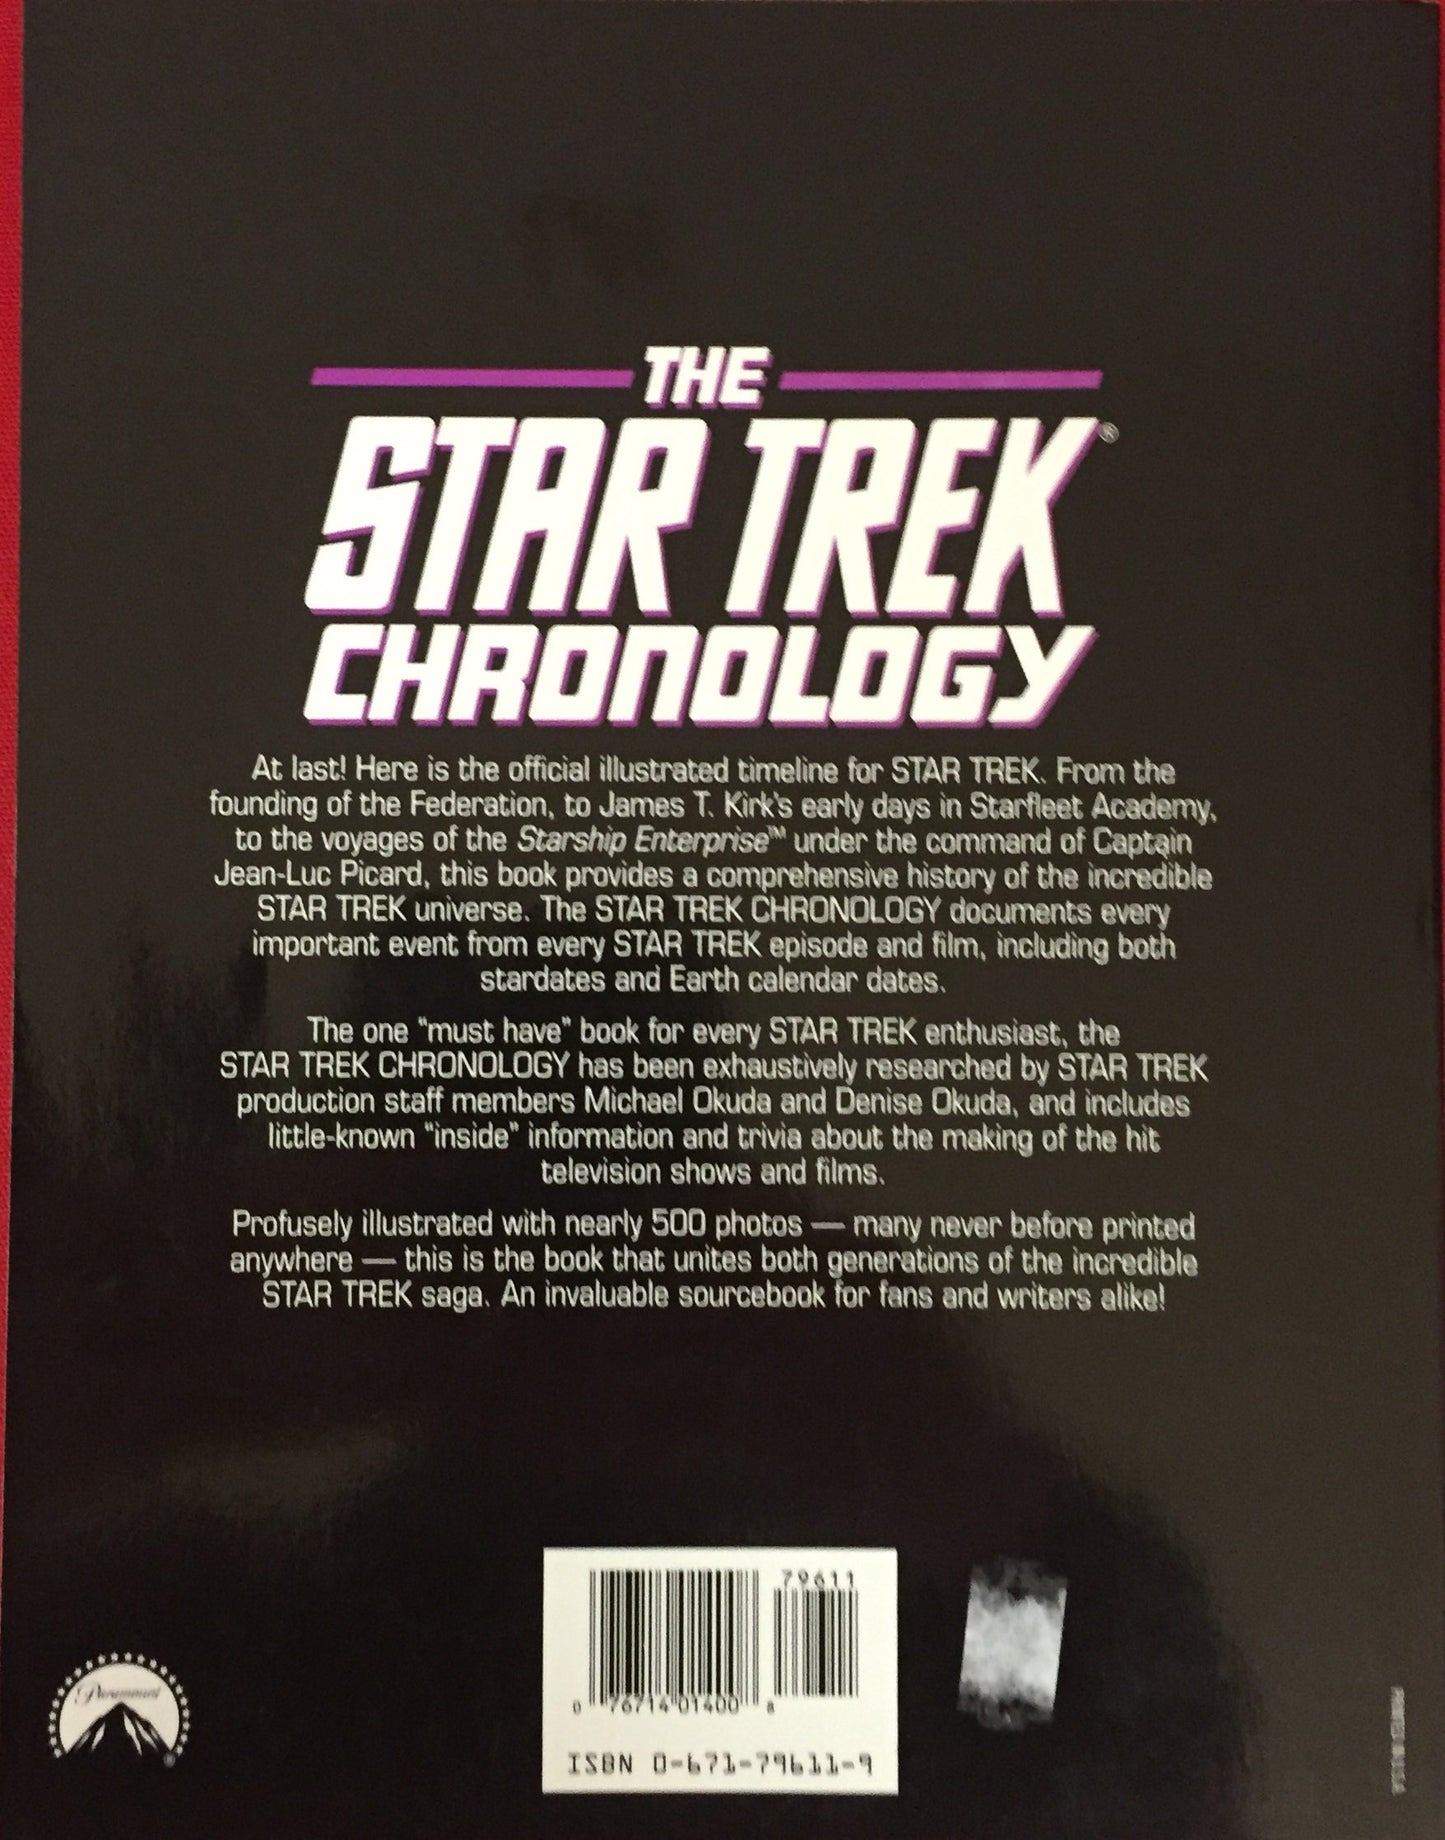 Vintage 1993 Star Trek Chronology The History Of The Future Large Paperback Book - Unsold Shop Stock Room Find